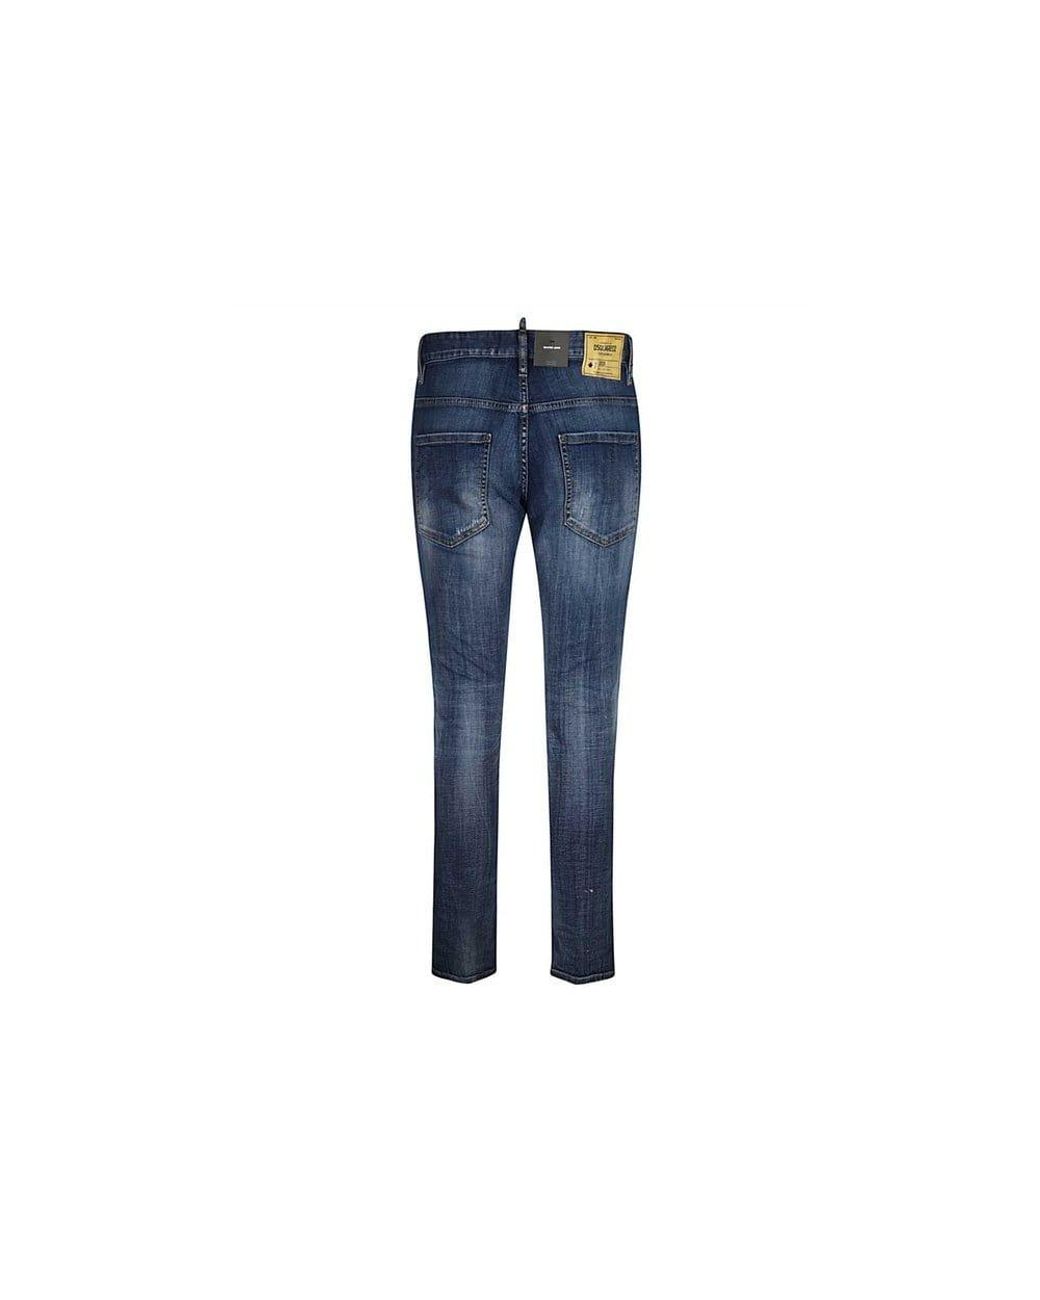 DSquared² Skater Jeans Caten Bros Patch Blue Jeans for Men | Lyst